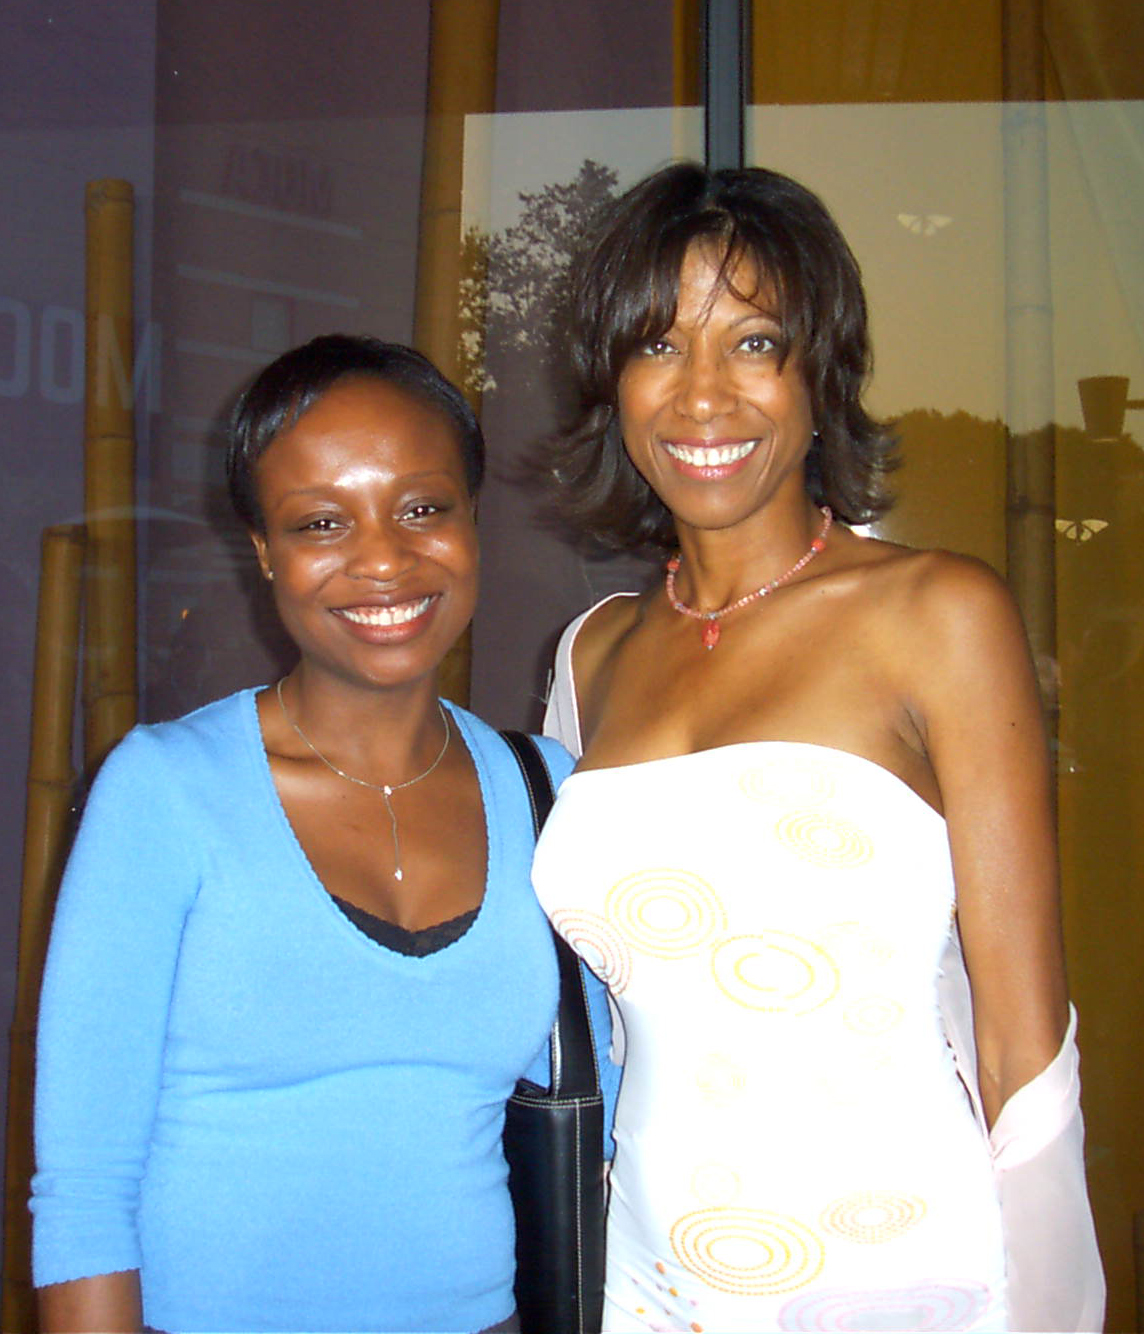 Gwendolyn Oliver and Nne Ebong at The Last Ride Premiere